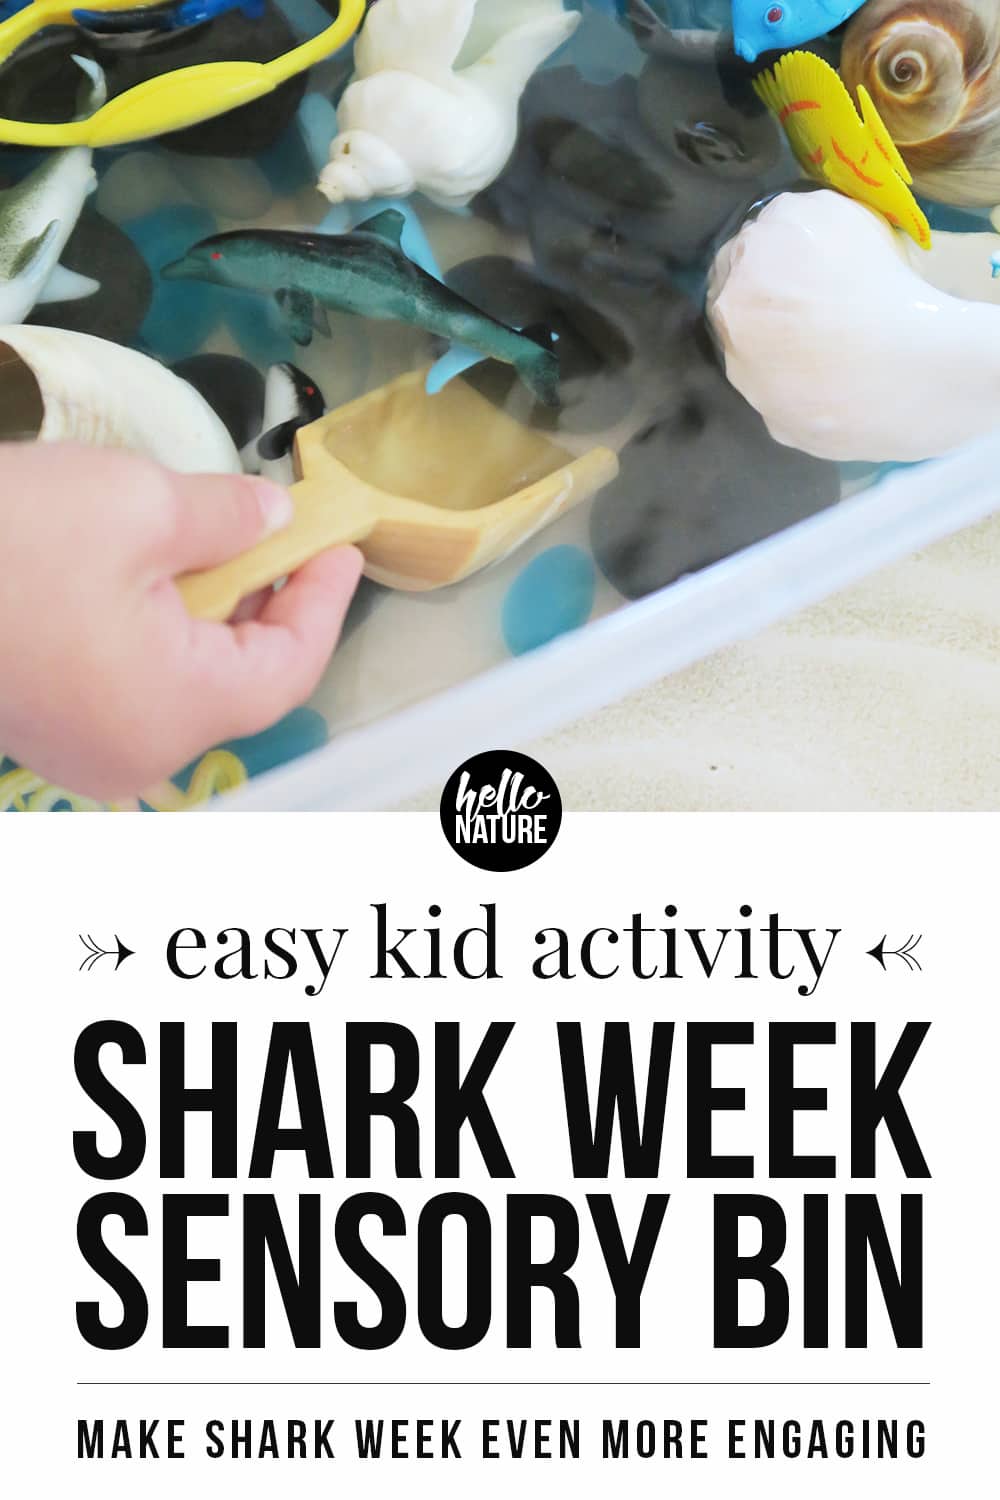 Need a fun indoor activity for your kids? Make this shark sensory bin! It's the perfect shark week activity for kids and it's a fintastic way to explore the ocean indoors! This is a toddler activity that can't be missed! #SensoryBin #ToddlerActivities #SharkWeek #IndoorActivities #IndoorToddlerActivities #RainyDayActivities